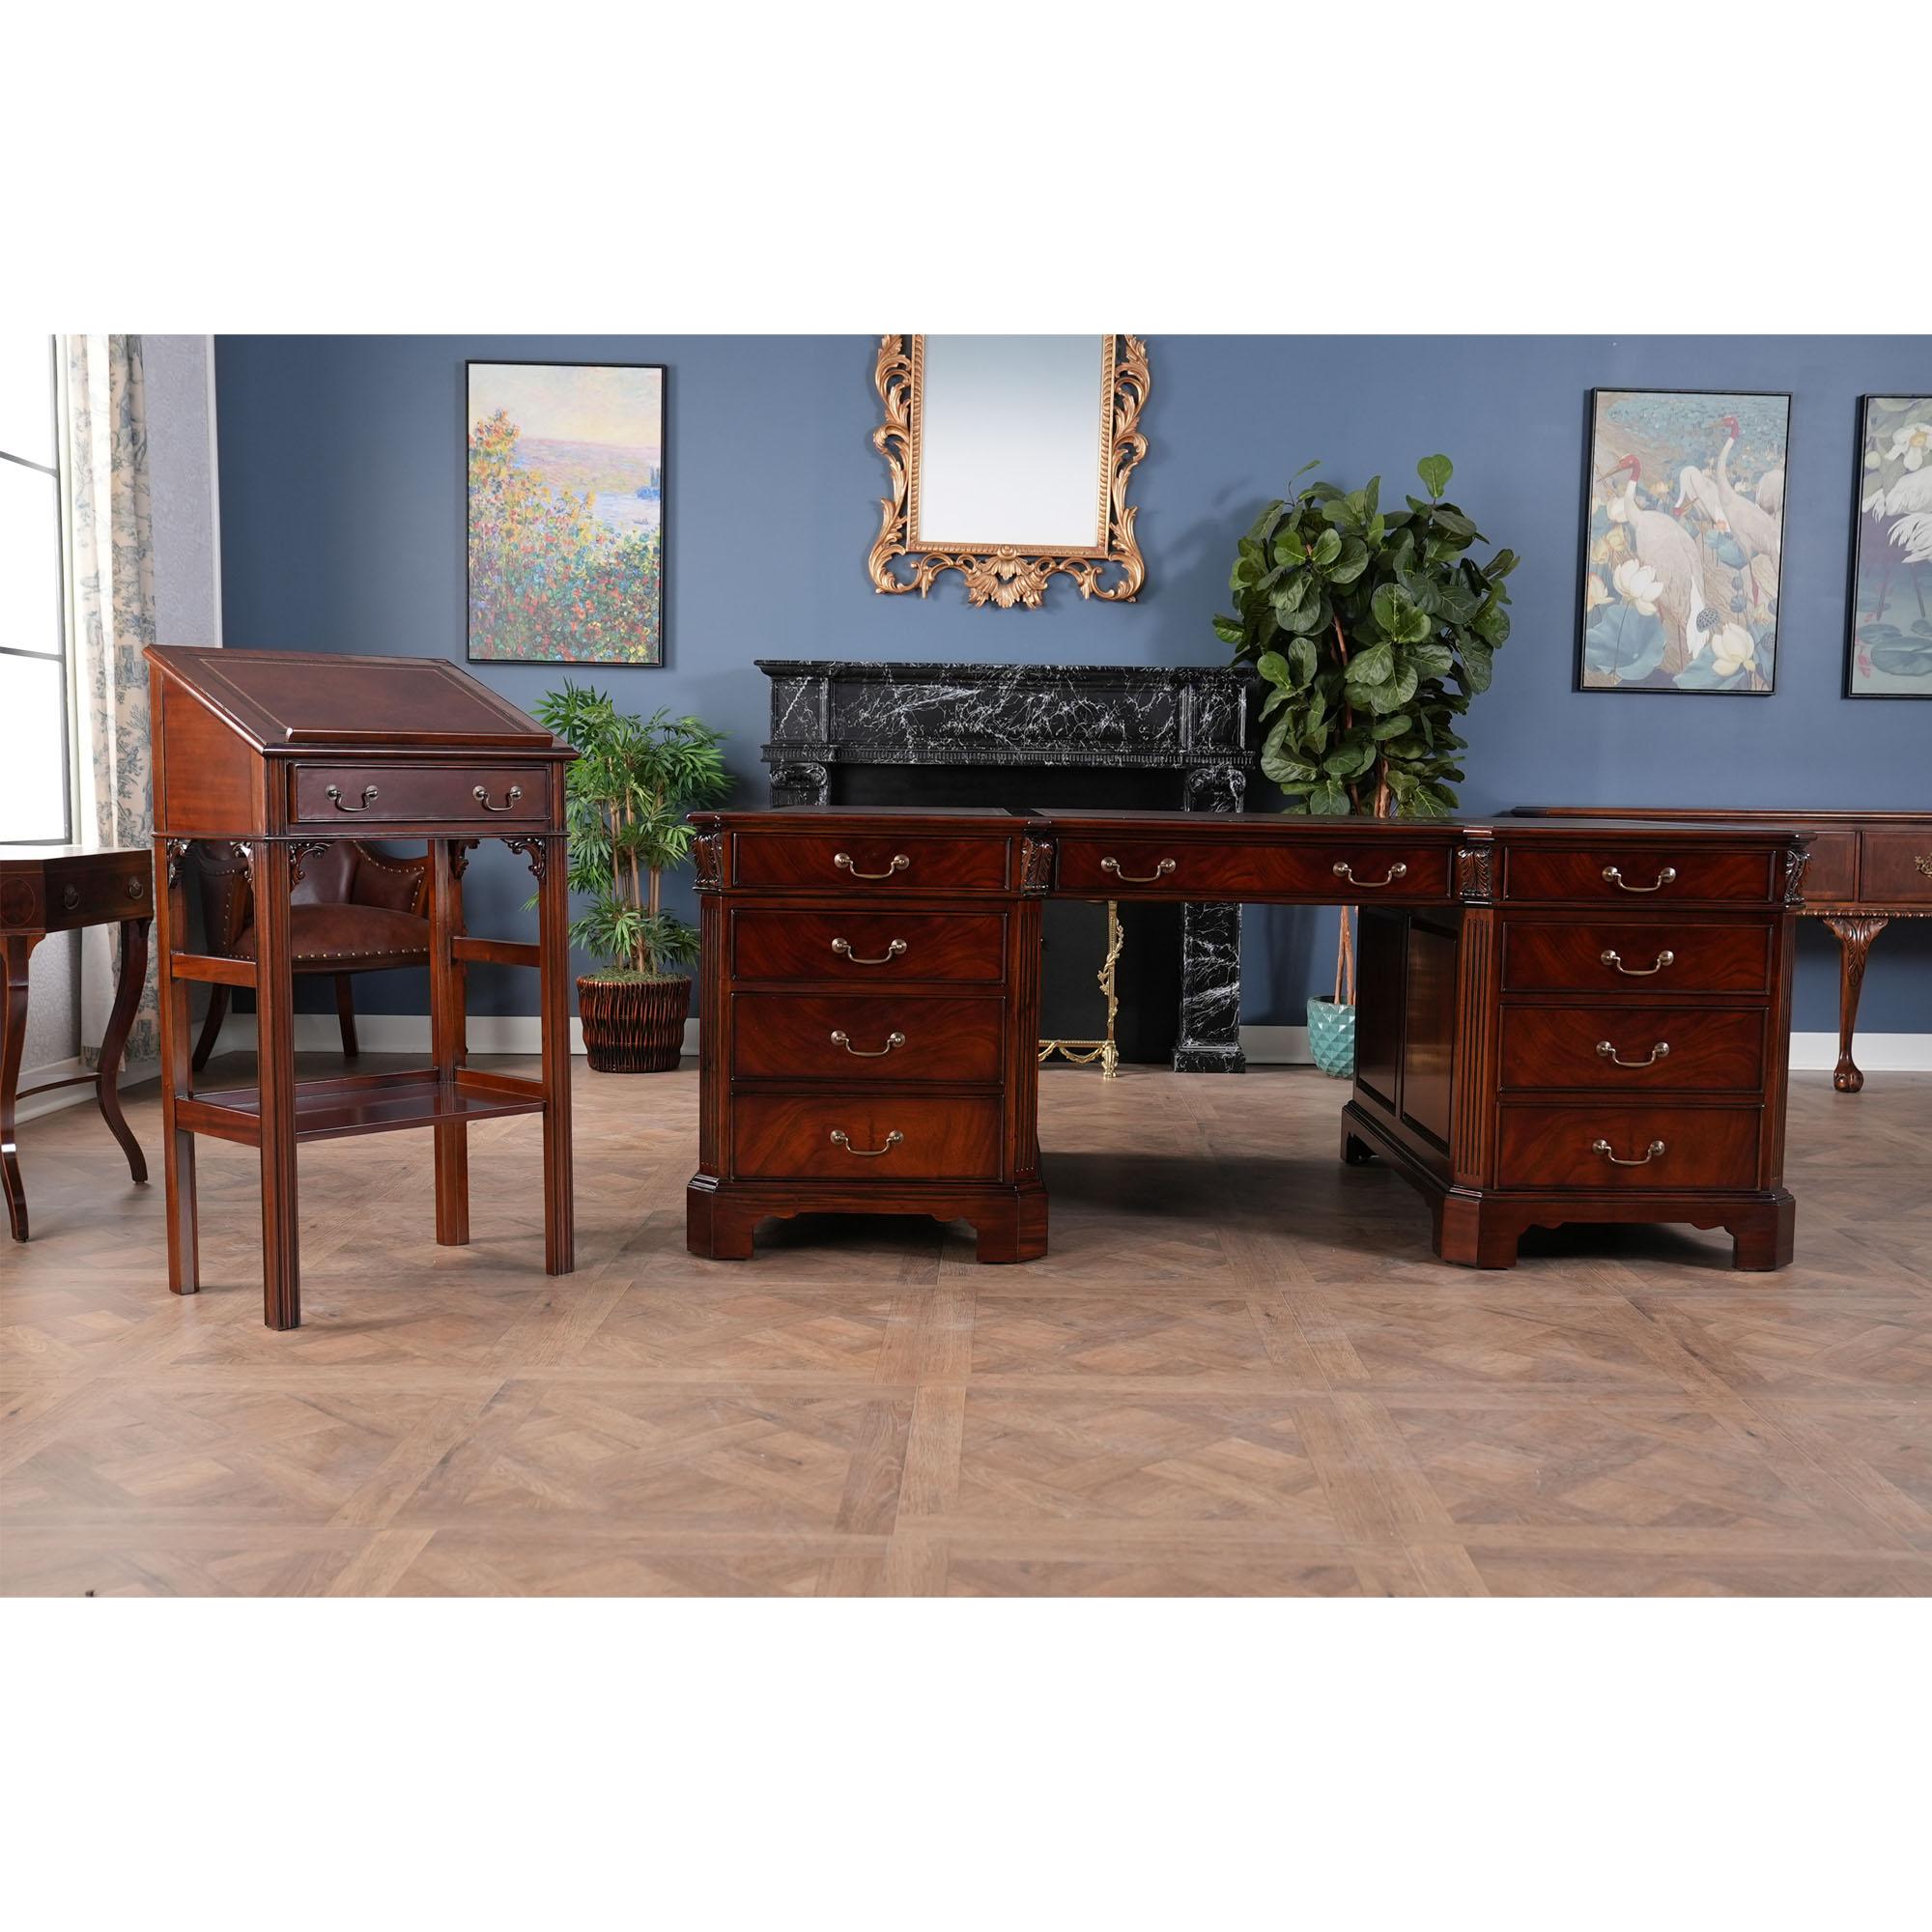 This beautiful Mahogany and Leather Lectern from Niagara Furniture is made of the finest solid mahogany and mahogany veneers. Built with clean, straight lines, the desk has a slant top lid with a genuine full grain leather surface incised with gold